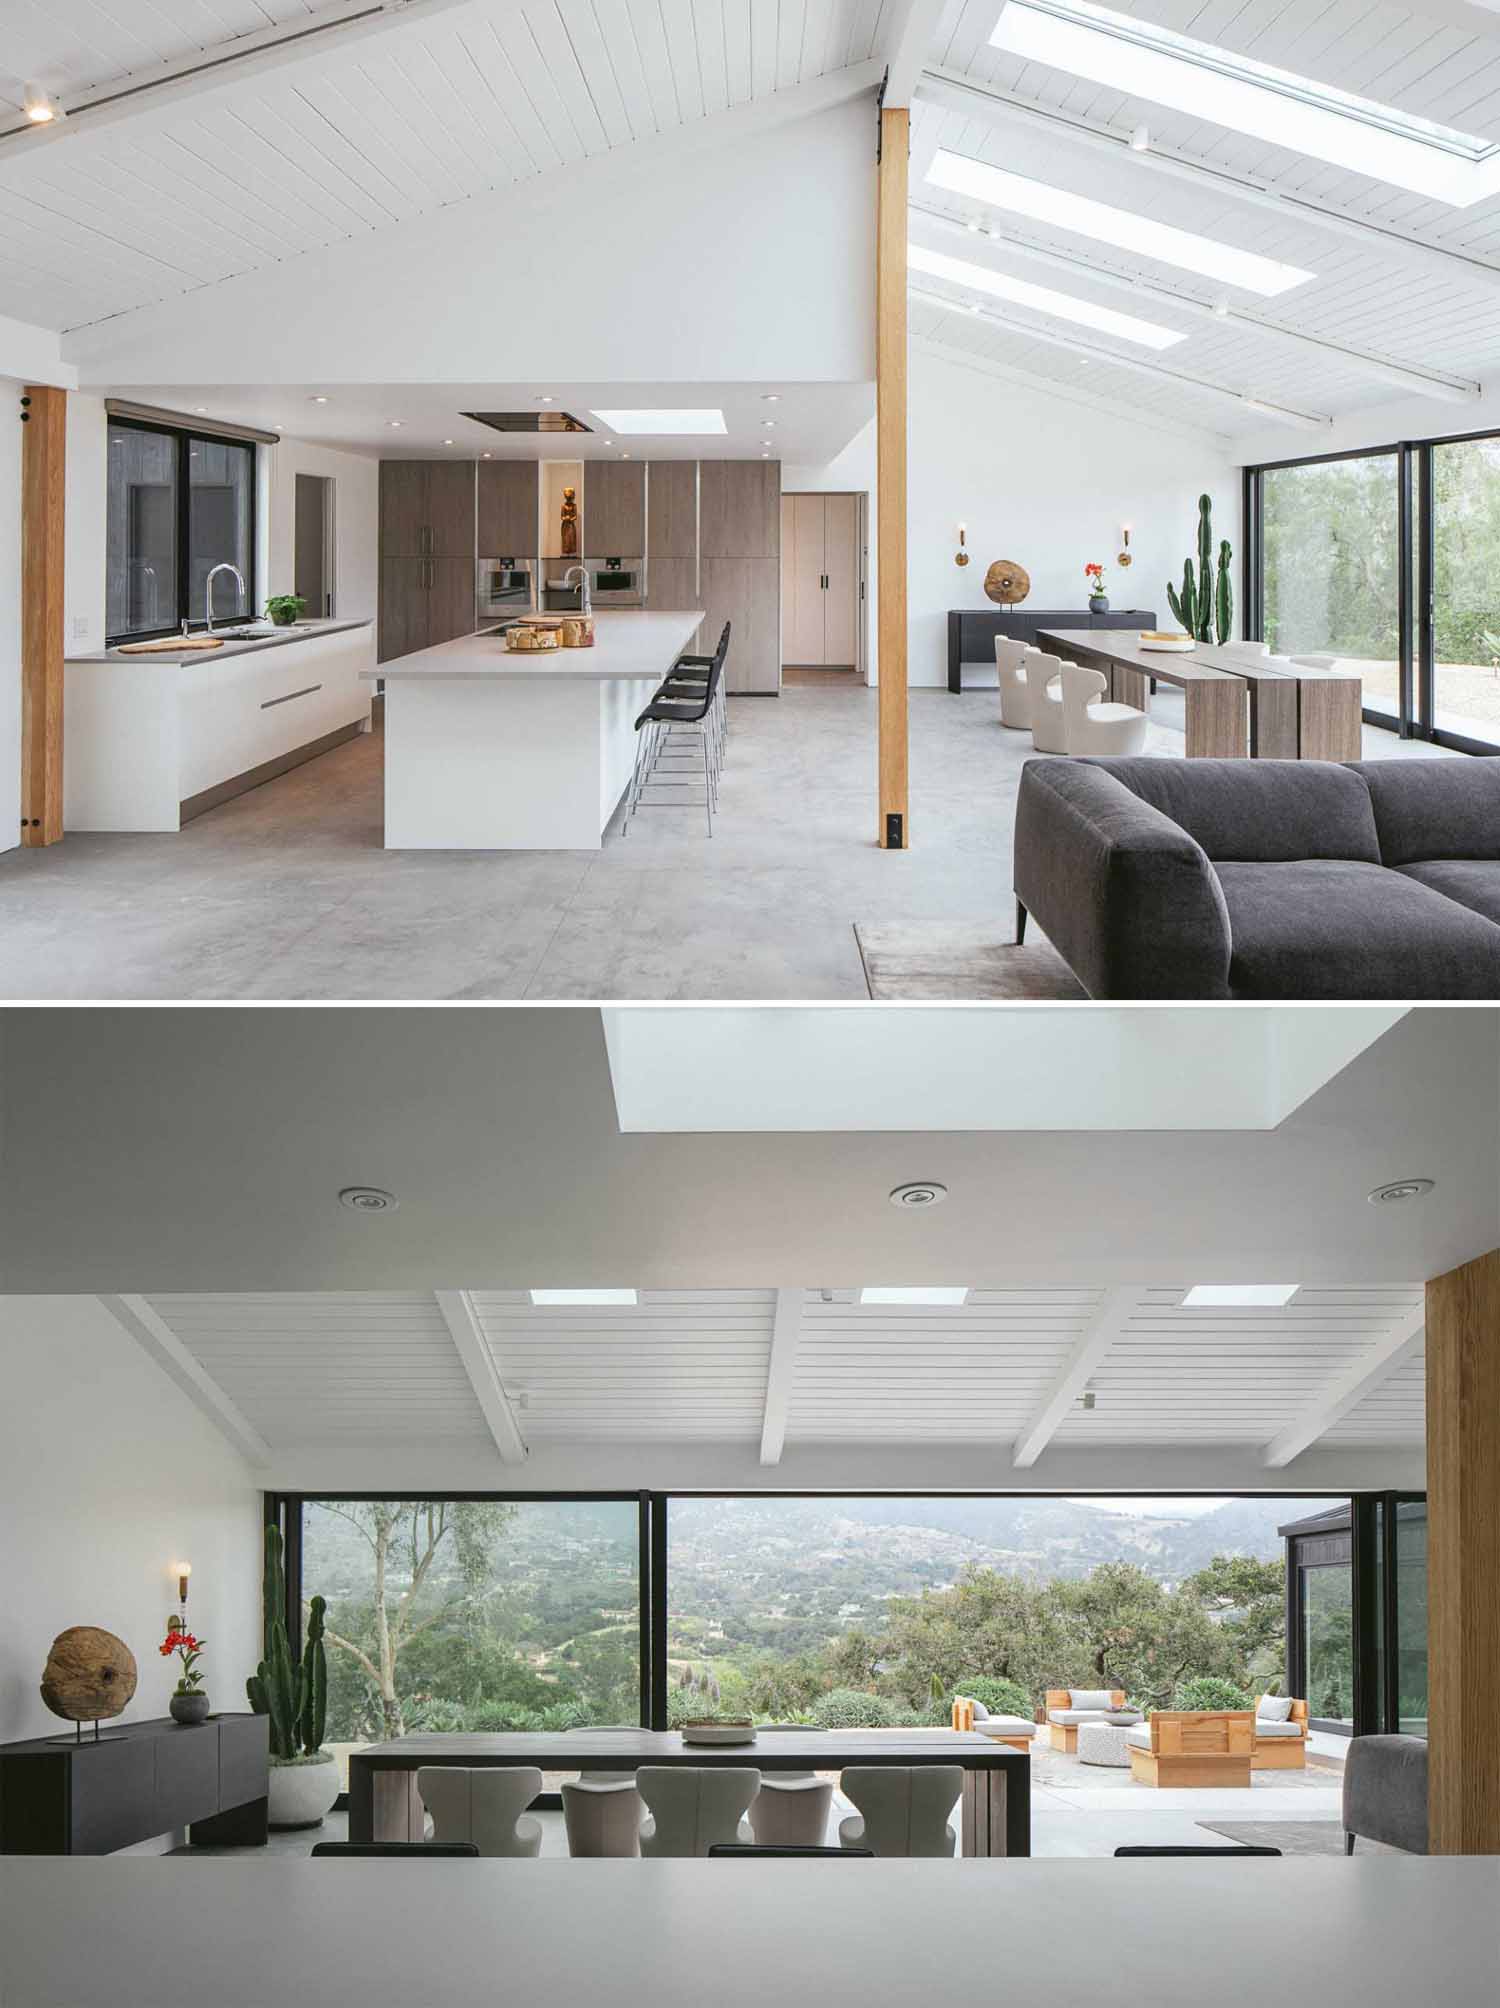 Interior surfaces of this renovated home, including carpets, vinyl flooring, and wood cladding, were changed to concrete and smooth gypsum siding, brightening the interior and modernizing the home.